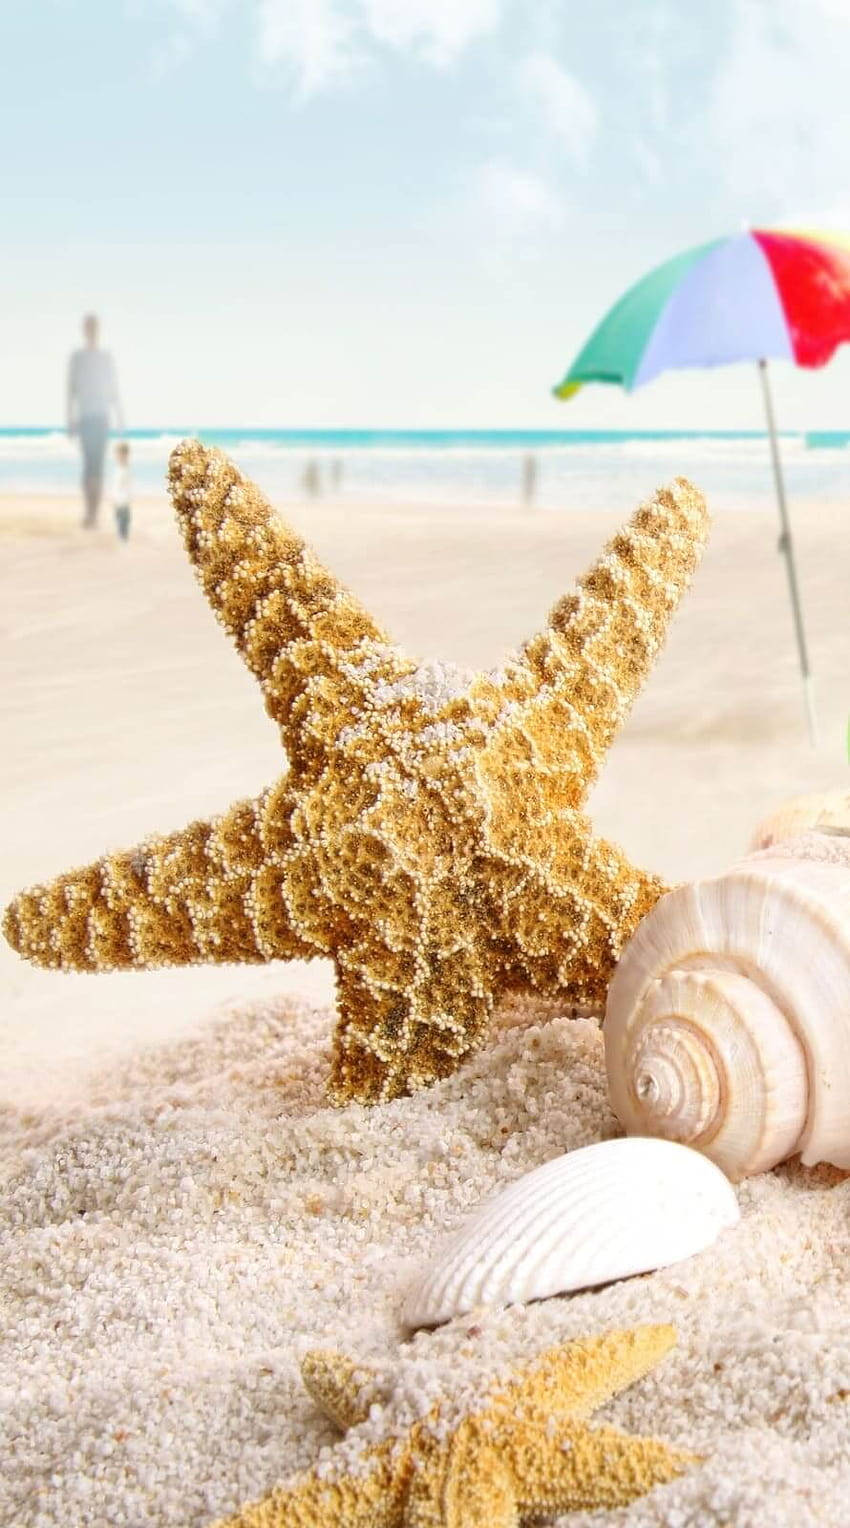 Starfish And Shells On The Beach With An Umbrella Wallpaper